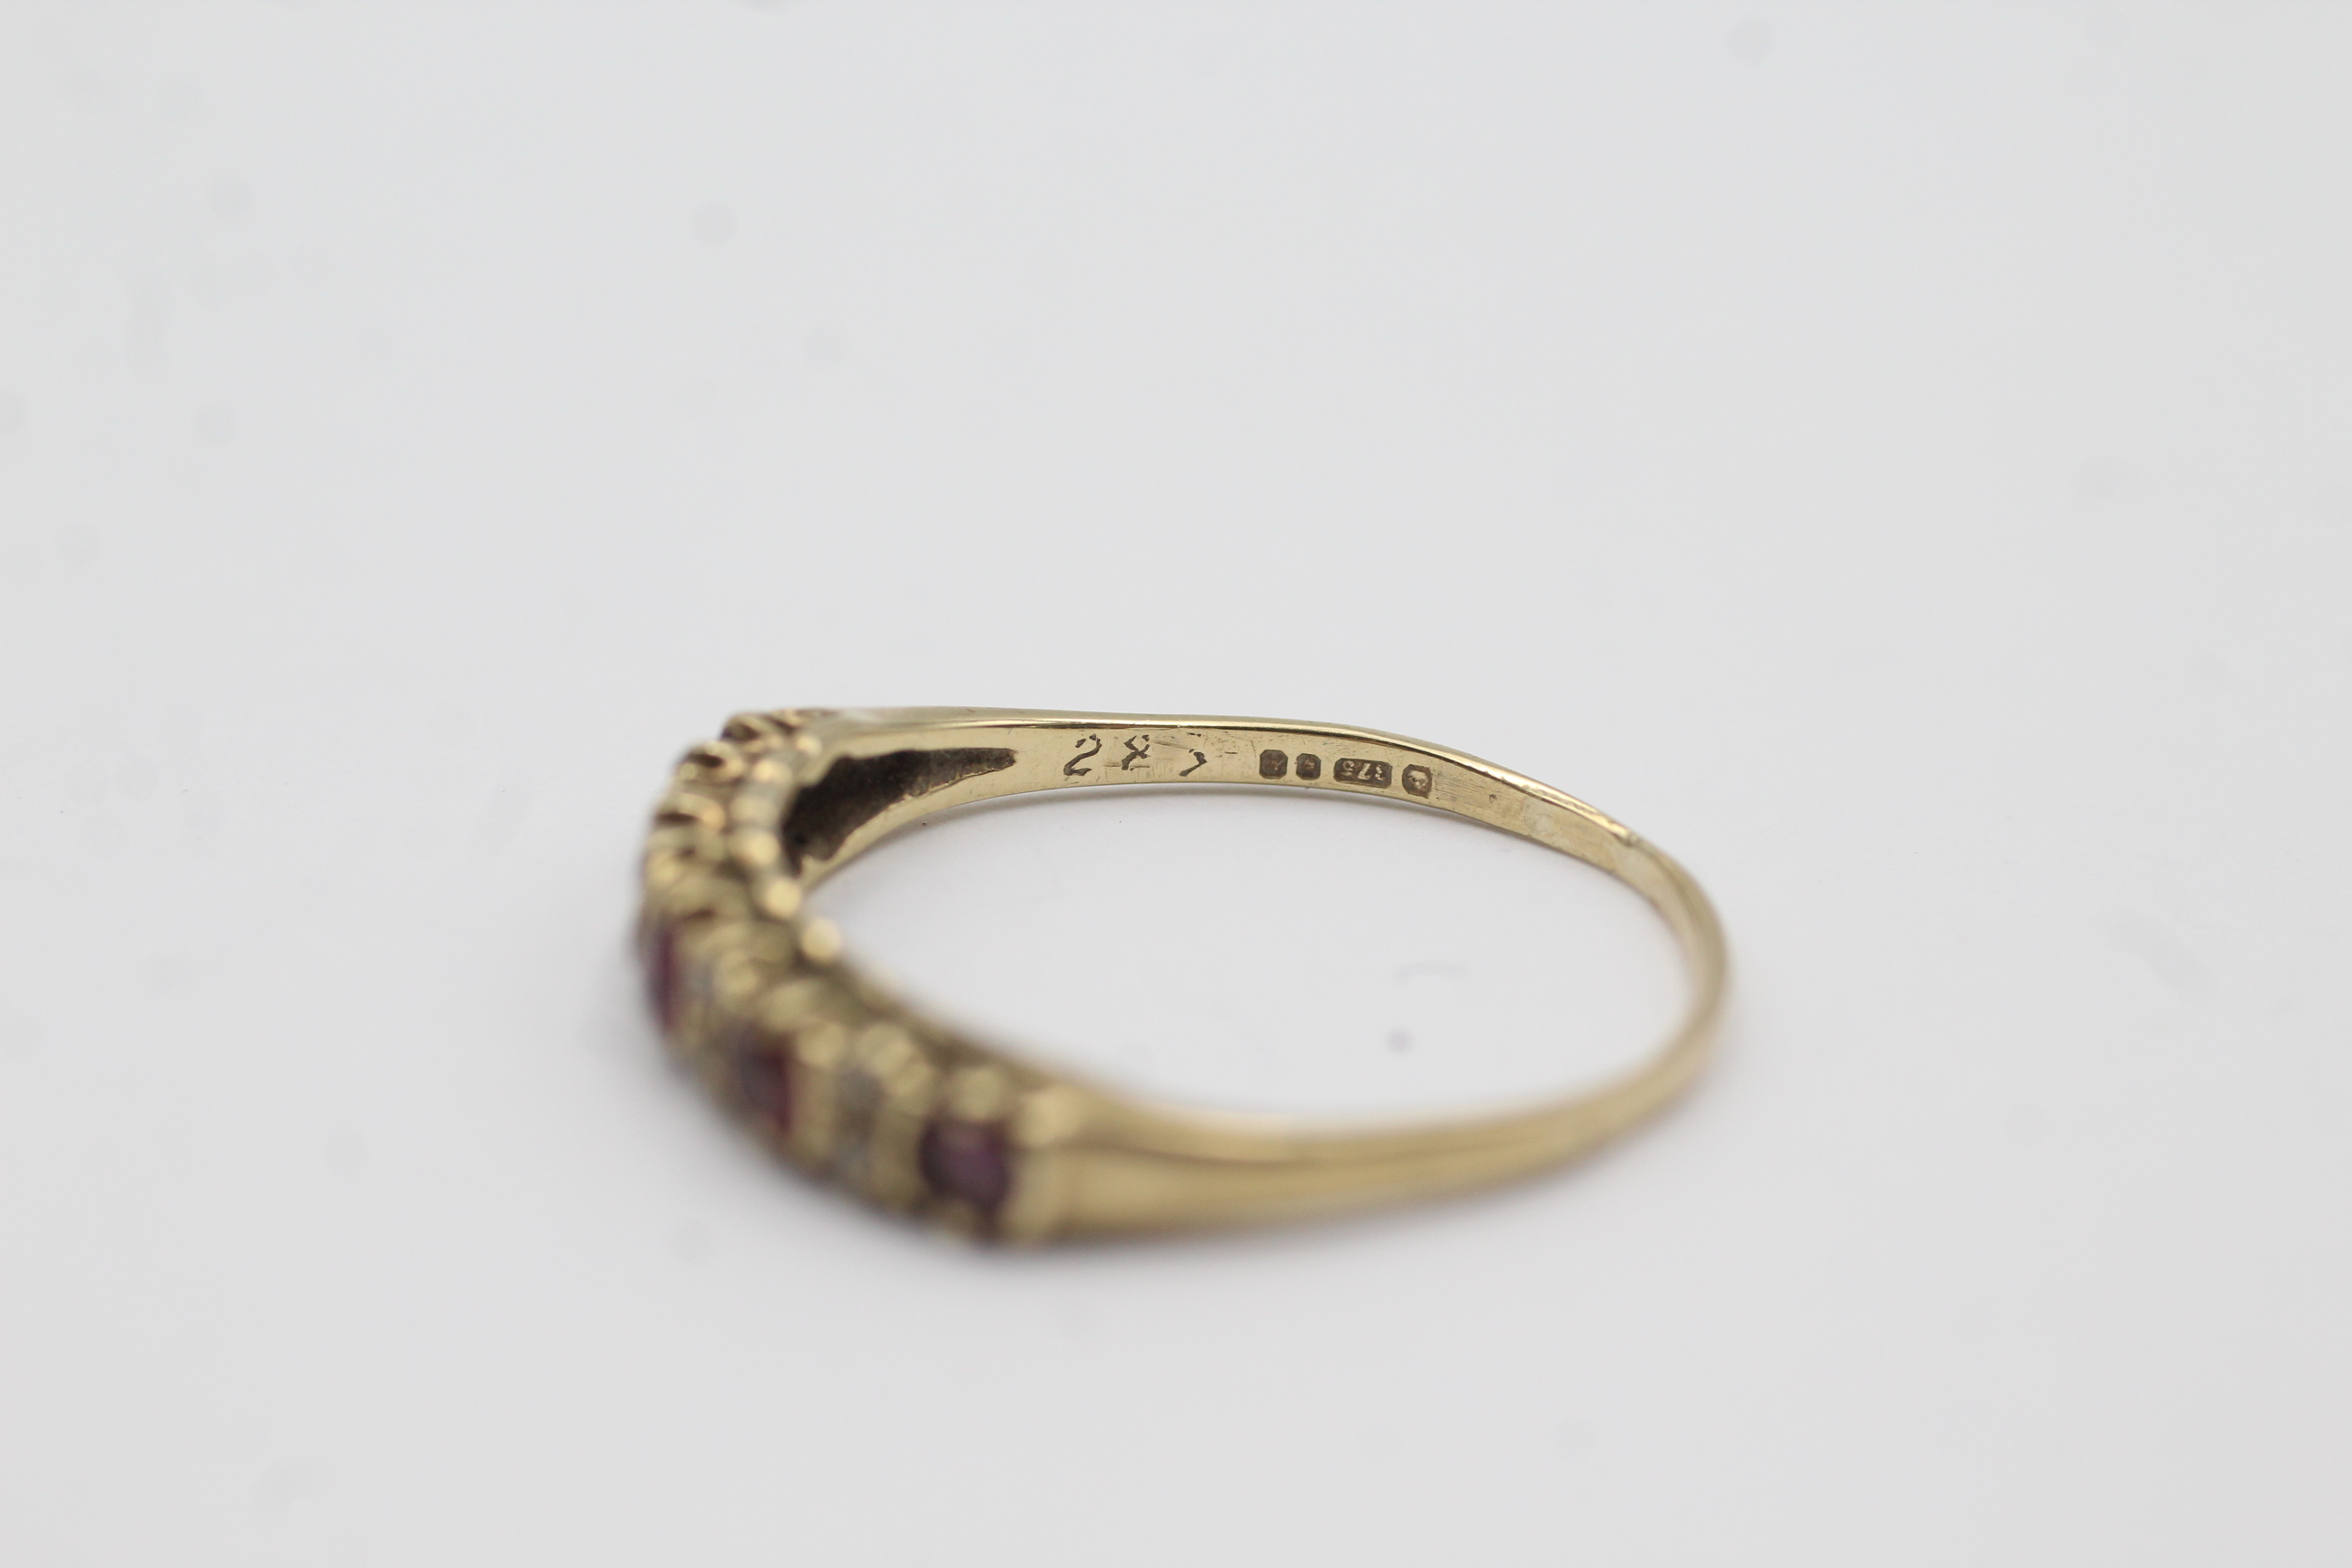 9ct gold ruby five stone ring with diamond spacers (1.4g) - Image 4 of 7